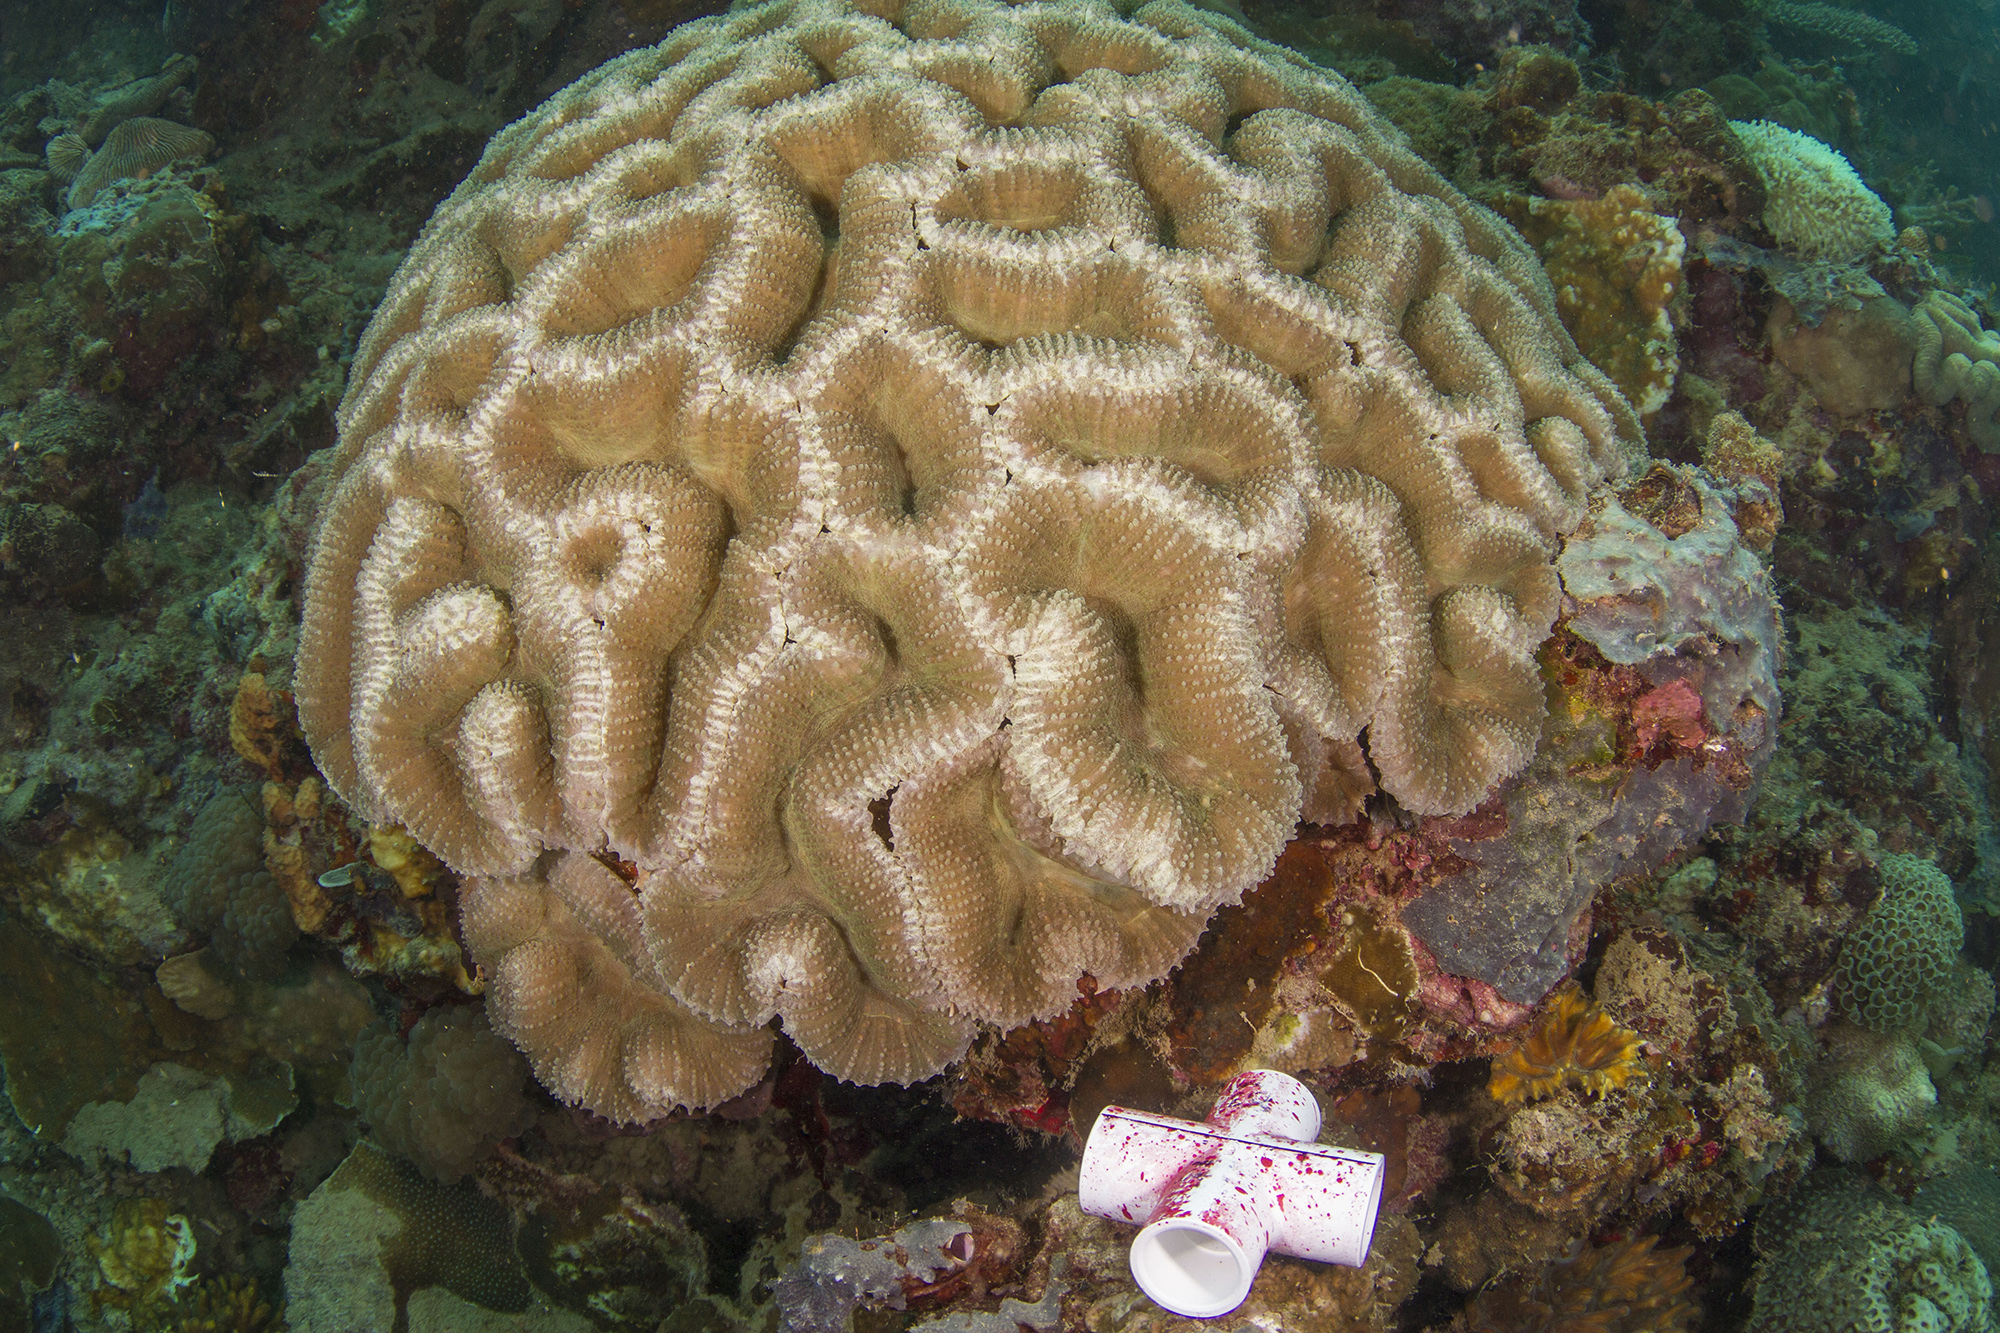 Some rare coral that looks like a brain